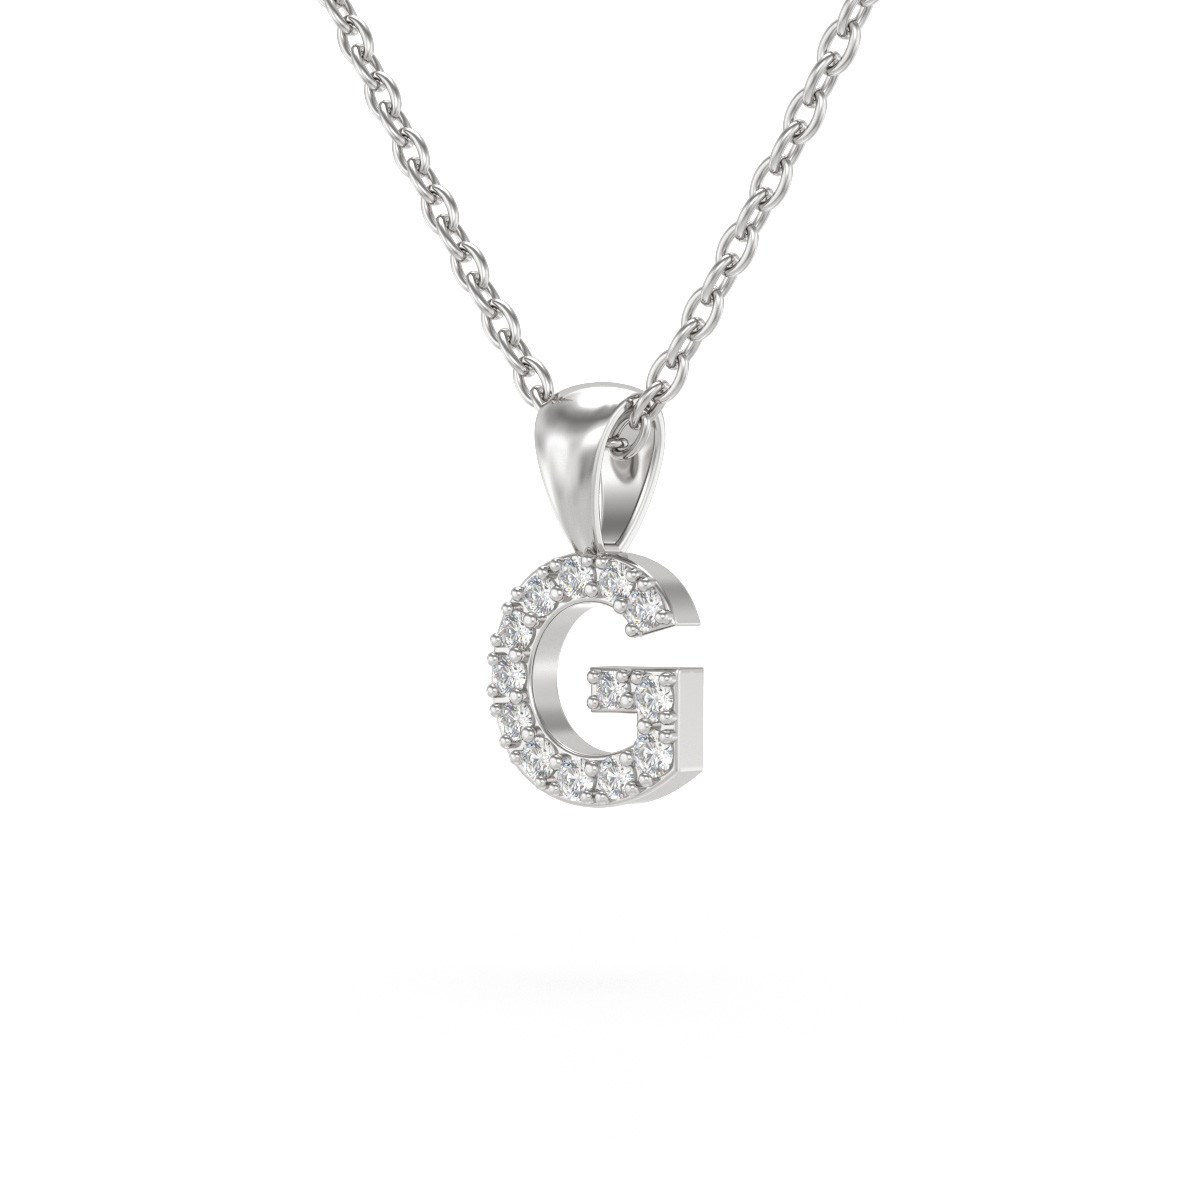 Collier Pendentif ADEN Lettre G Or 750 Blanc Diamant Chaine Or 750 incluse 0.72grs - vue 3